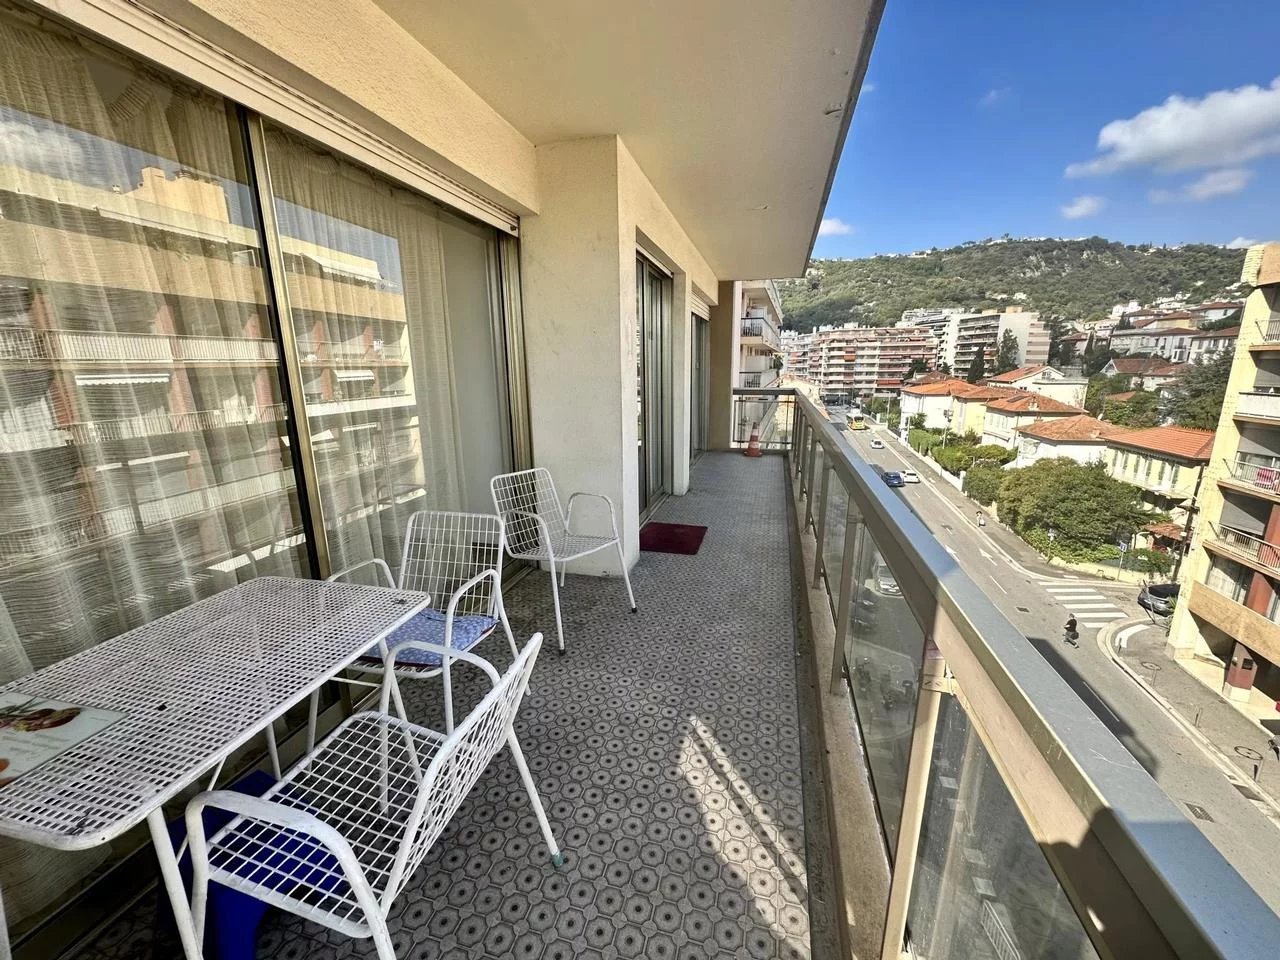 Appartement  3 Rooms 62.96m2  for sale   239 000 €